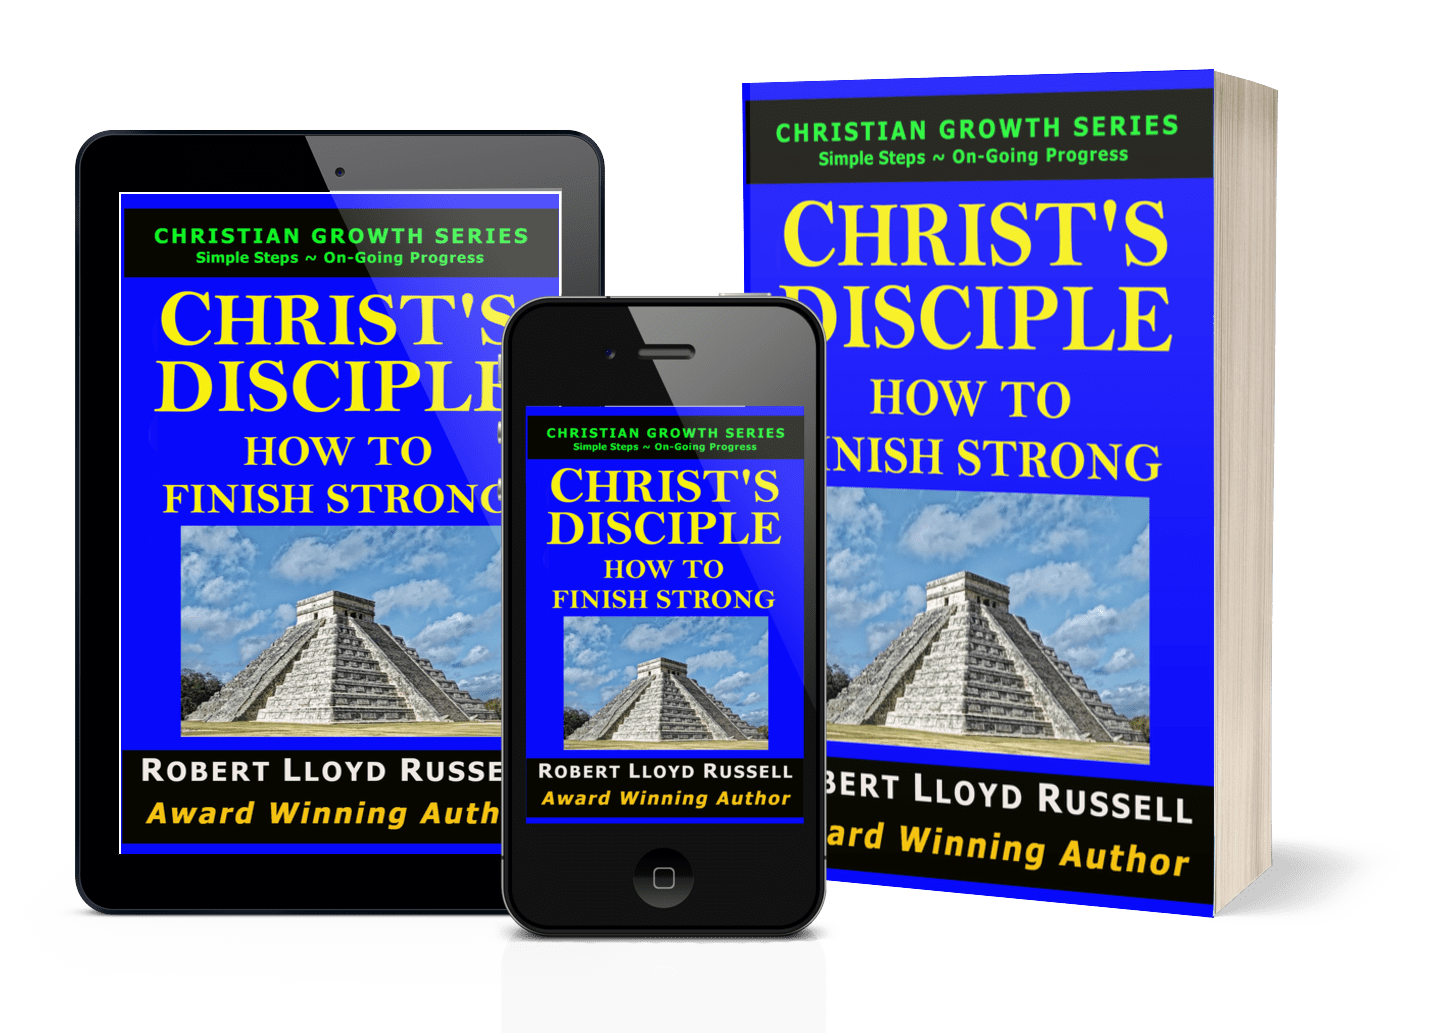 Book cover of CHRIST’S DISCIPLE, How To Finish Strong.